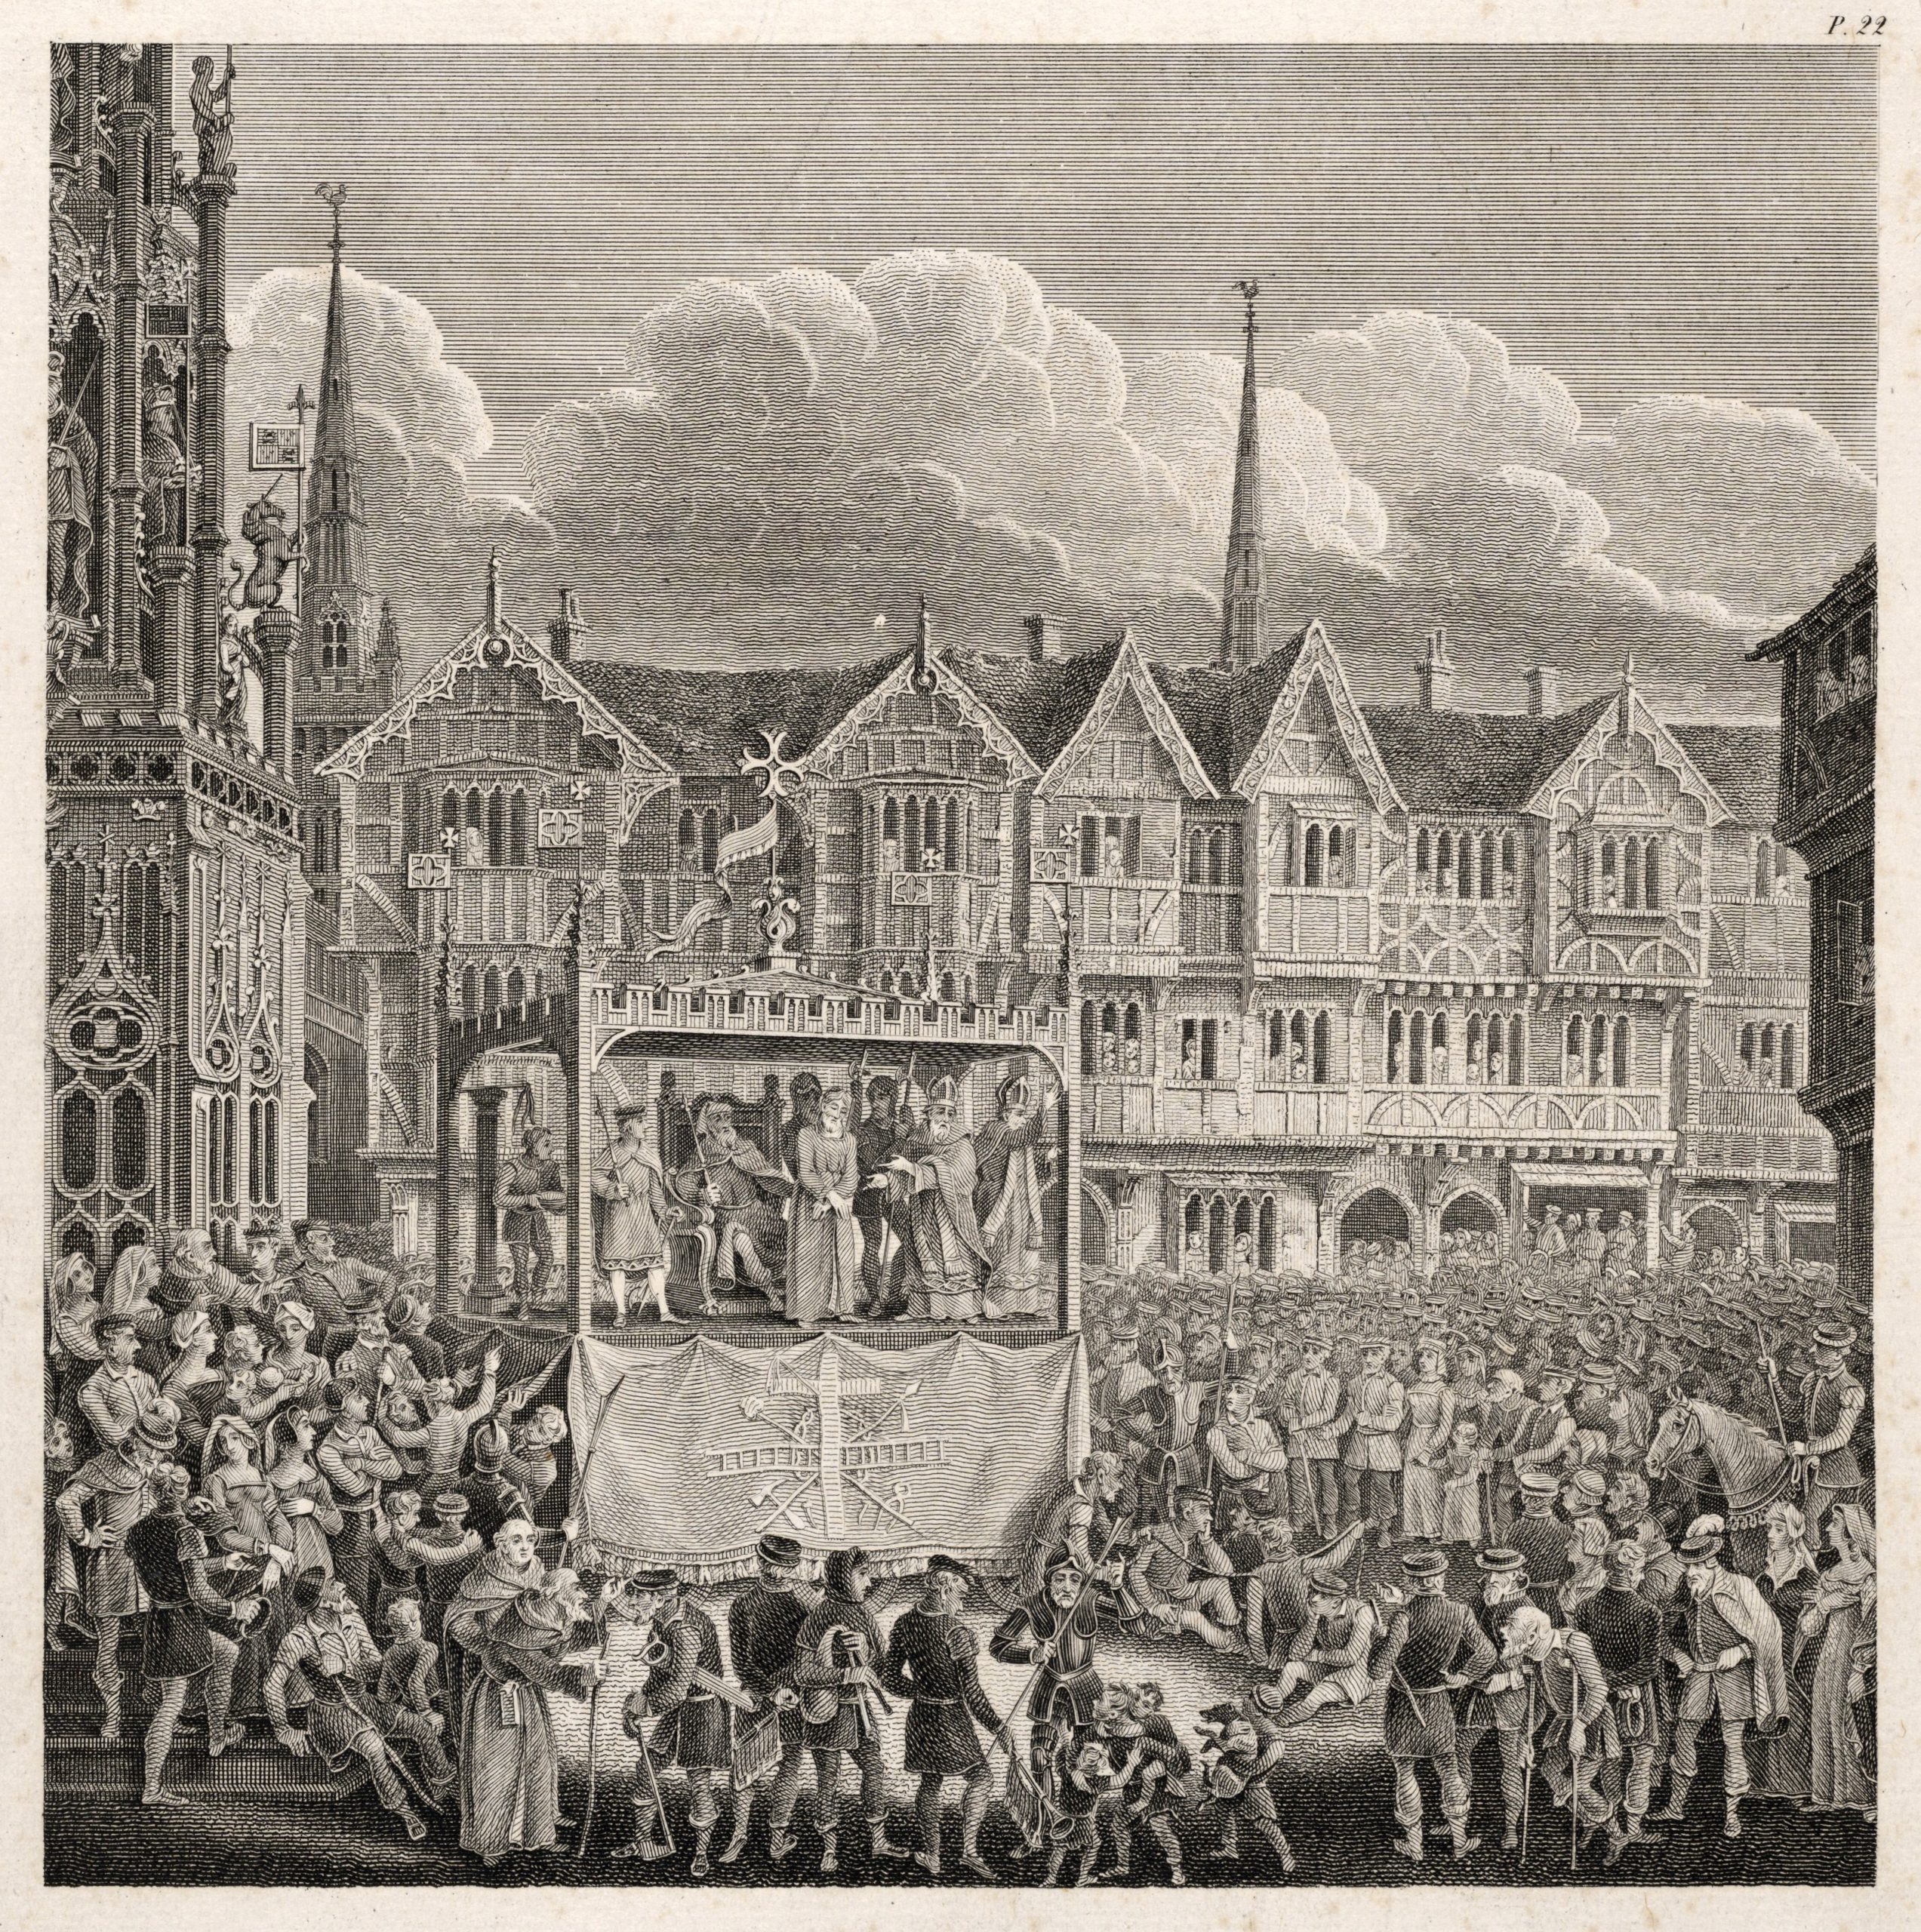 Coventry play of the Trial of Christ performed on a pageant wagon.